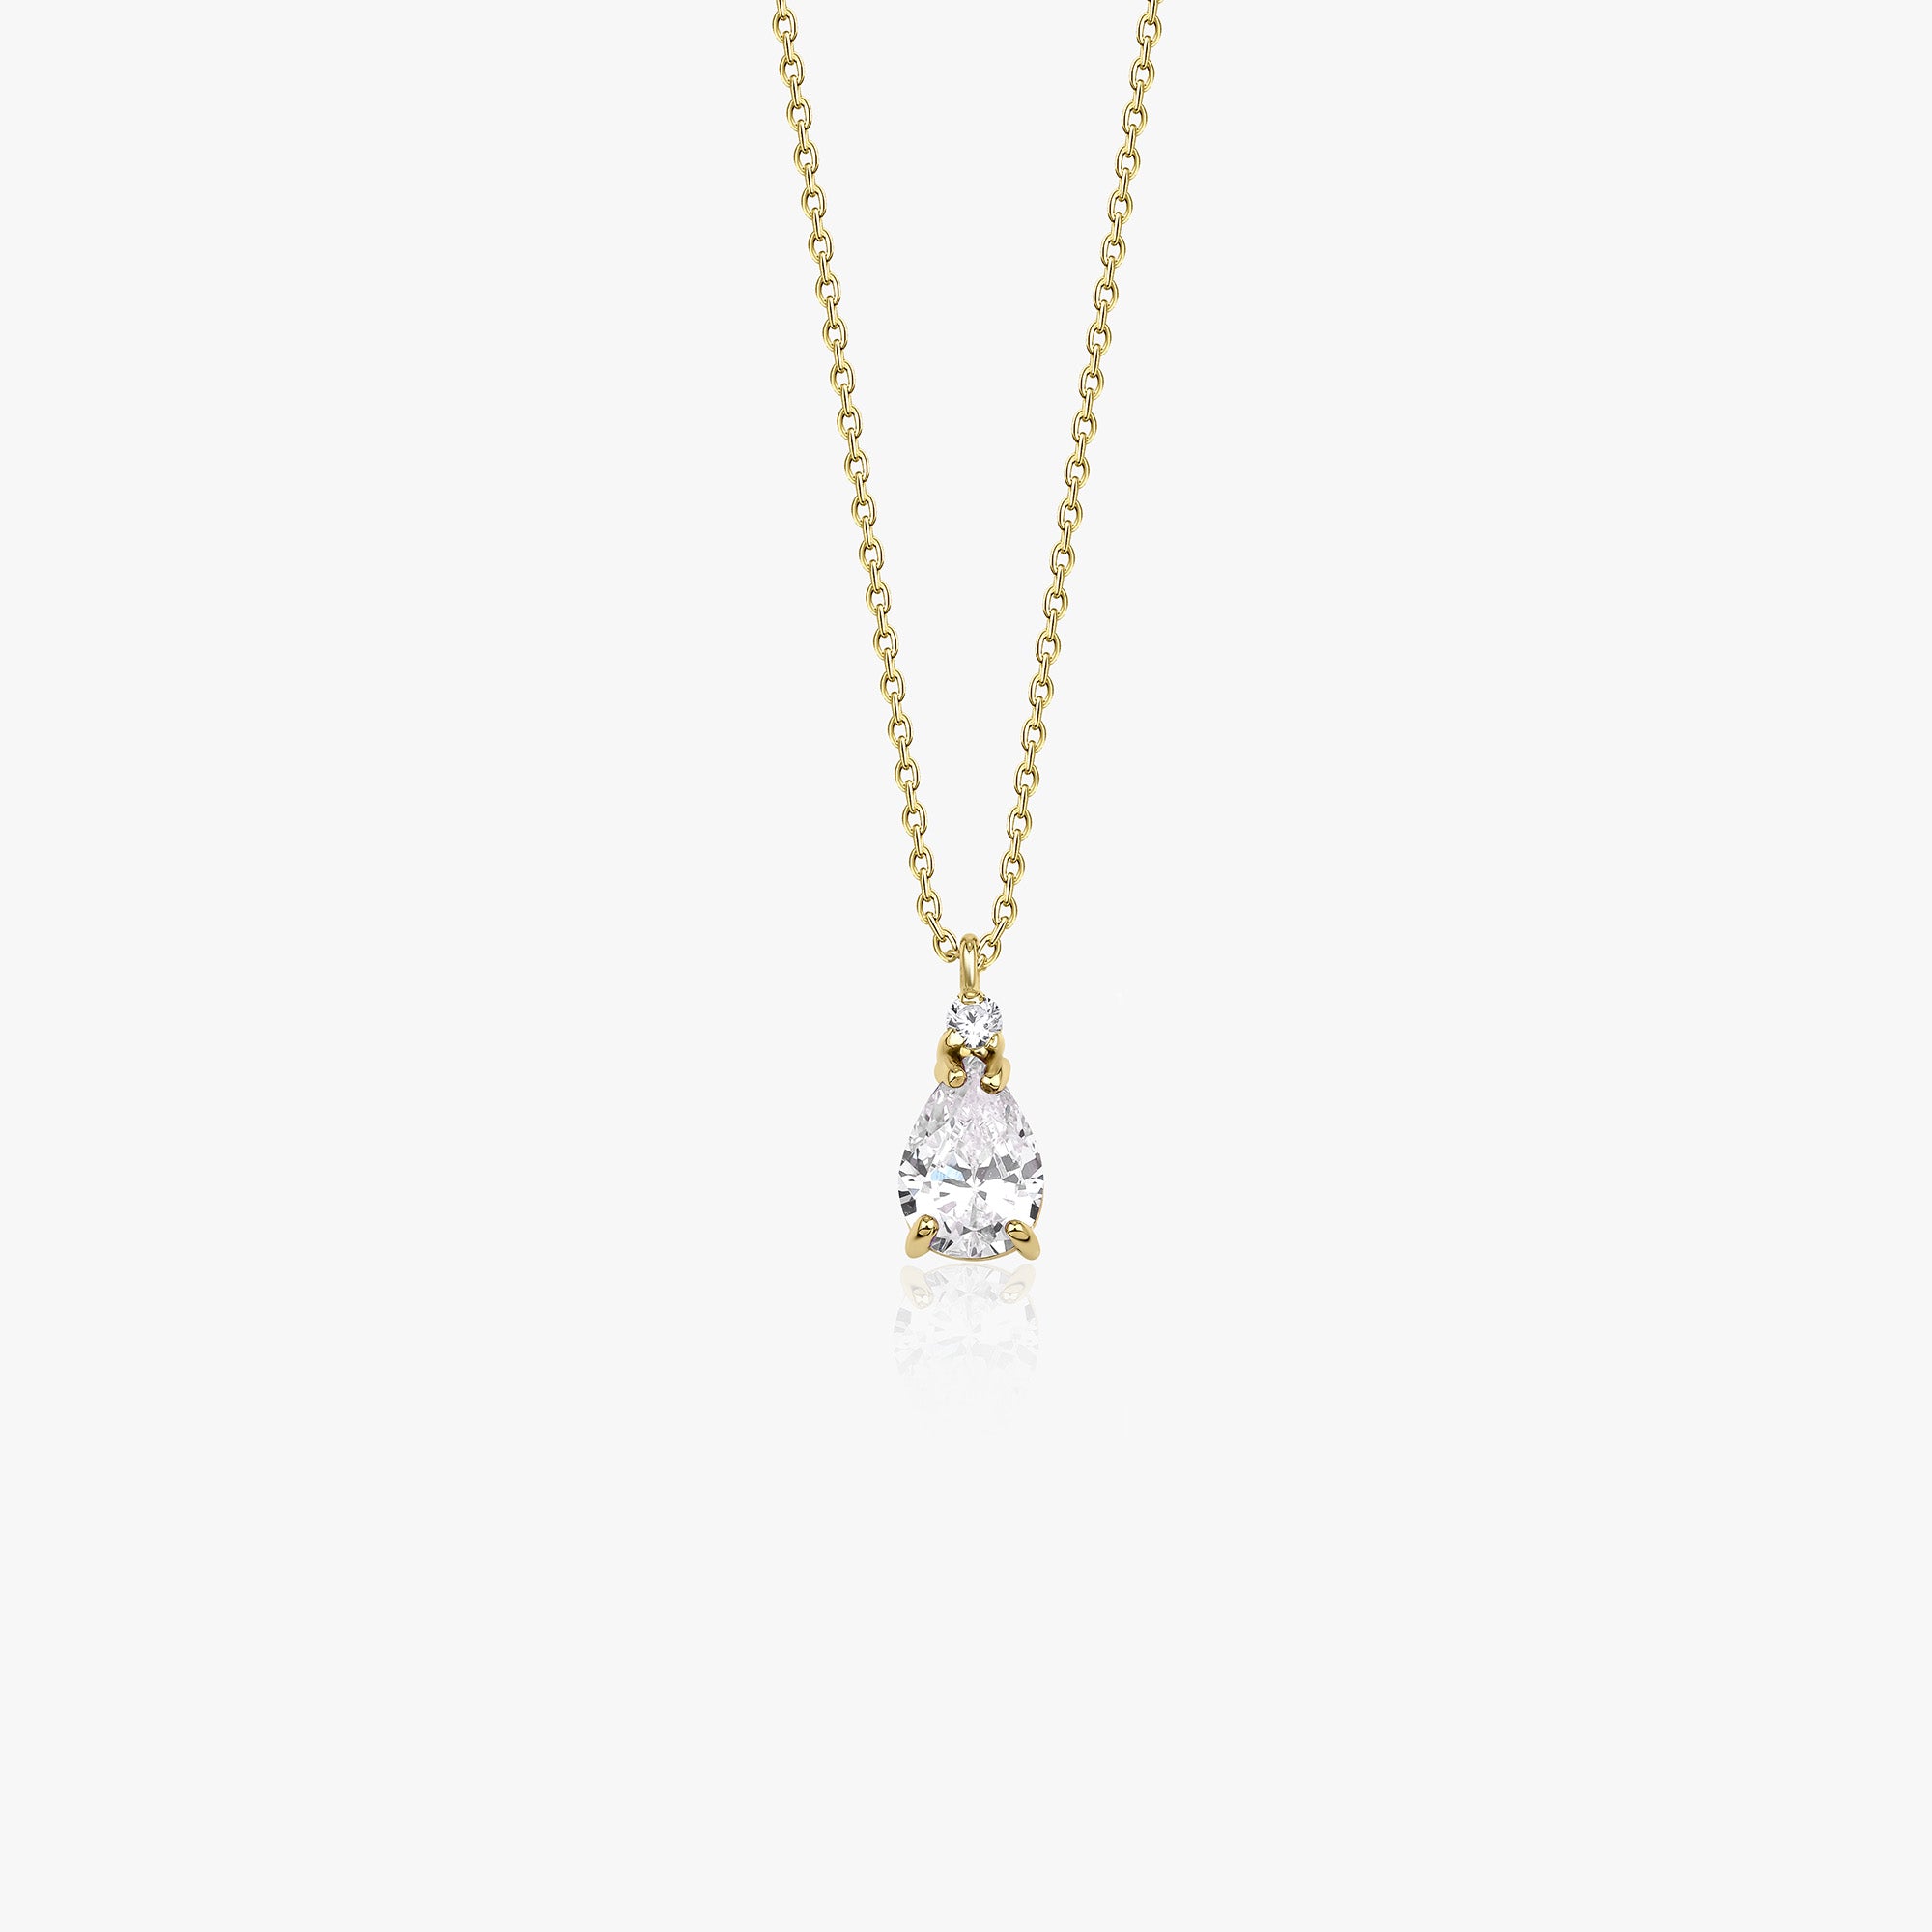 Mini Drop Necklace in 14K Gold